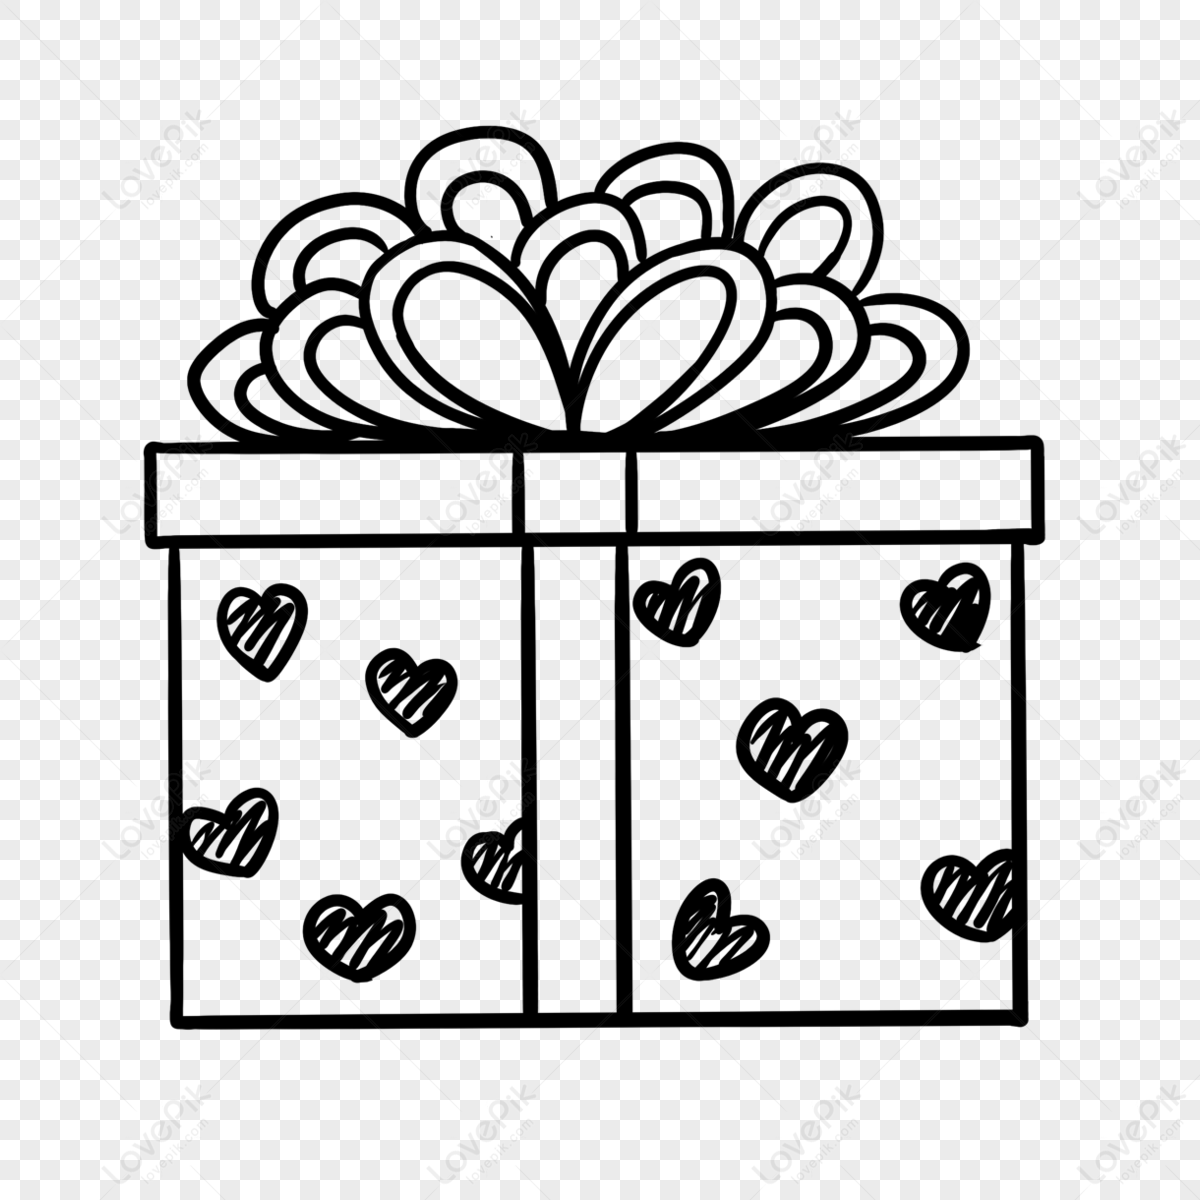 Drawing Box | How to draw a cute gift box for birthday - YouTube | Cute gift  boxes, Cute gifts, Gifts